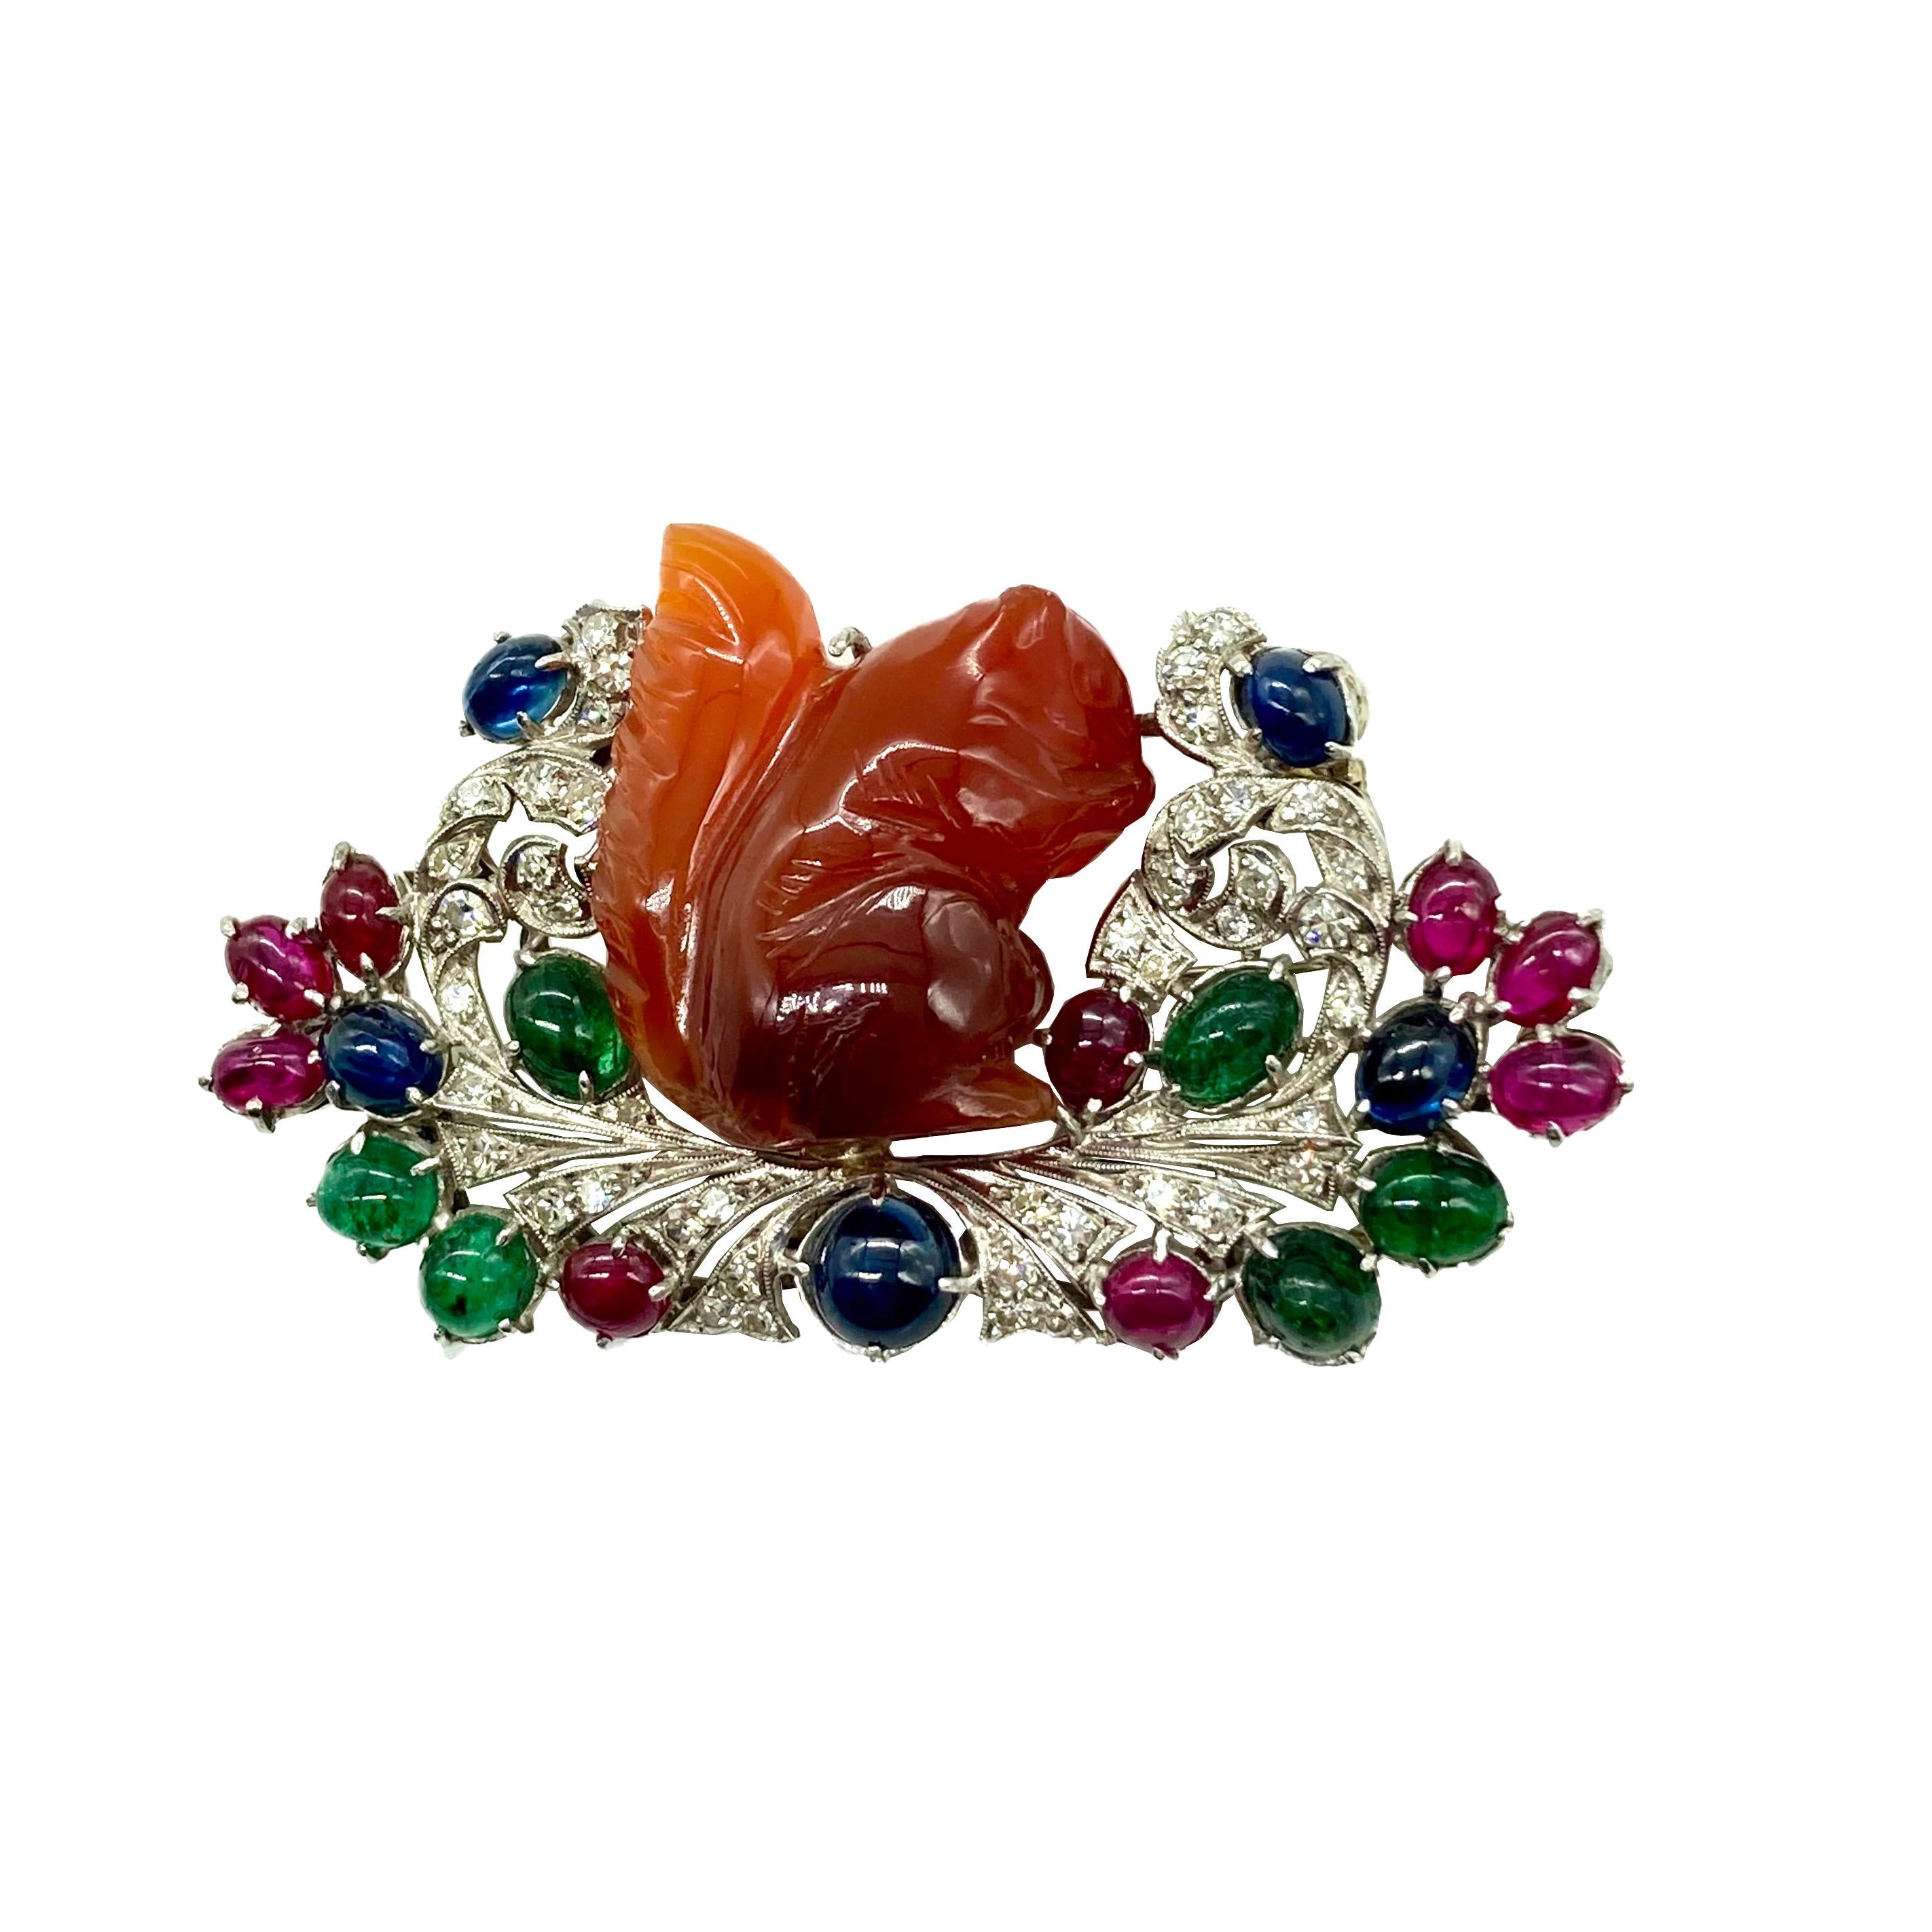 A sophisticated Art Deco brooch centering a carved carnelian squirrel, embellished with diamonds, rubies, sapphires, and emeralds. Circa 1925.